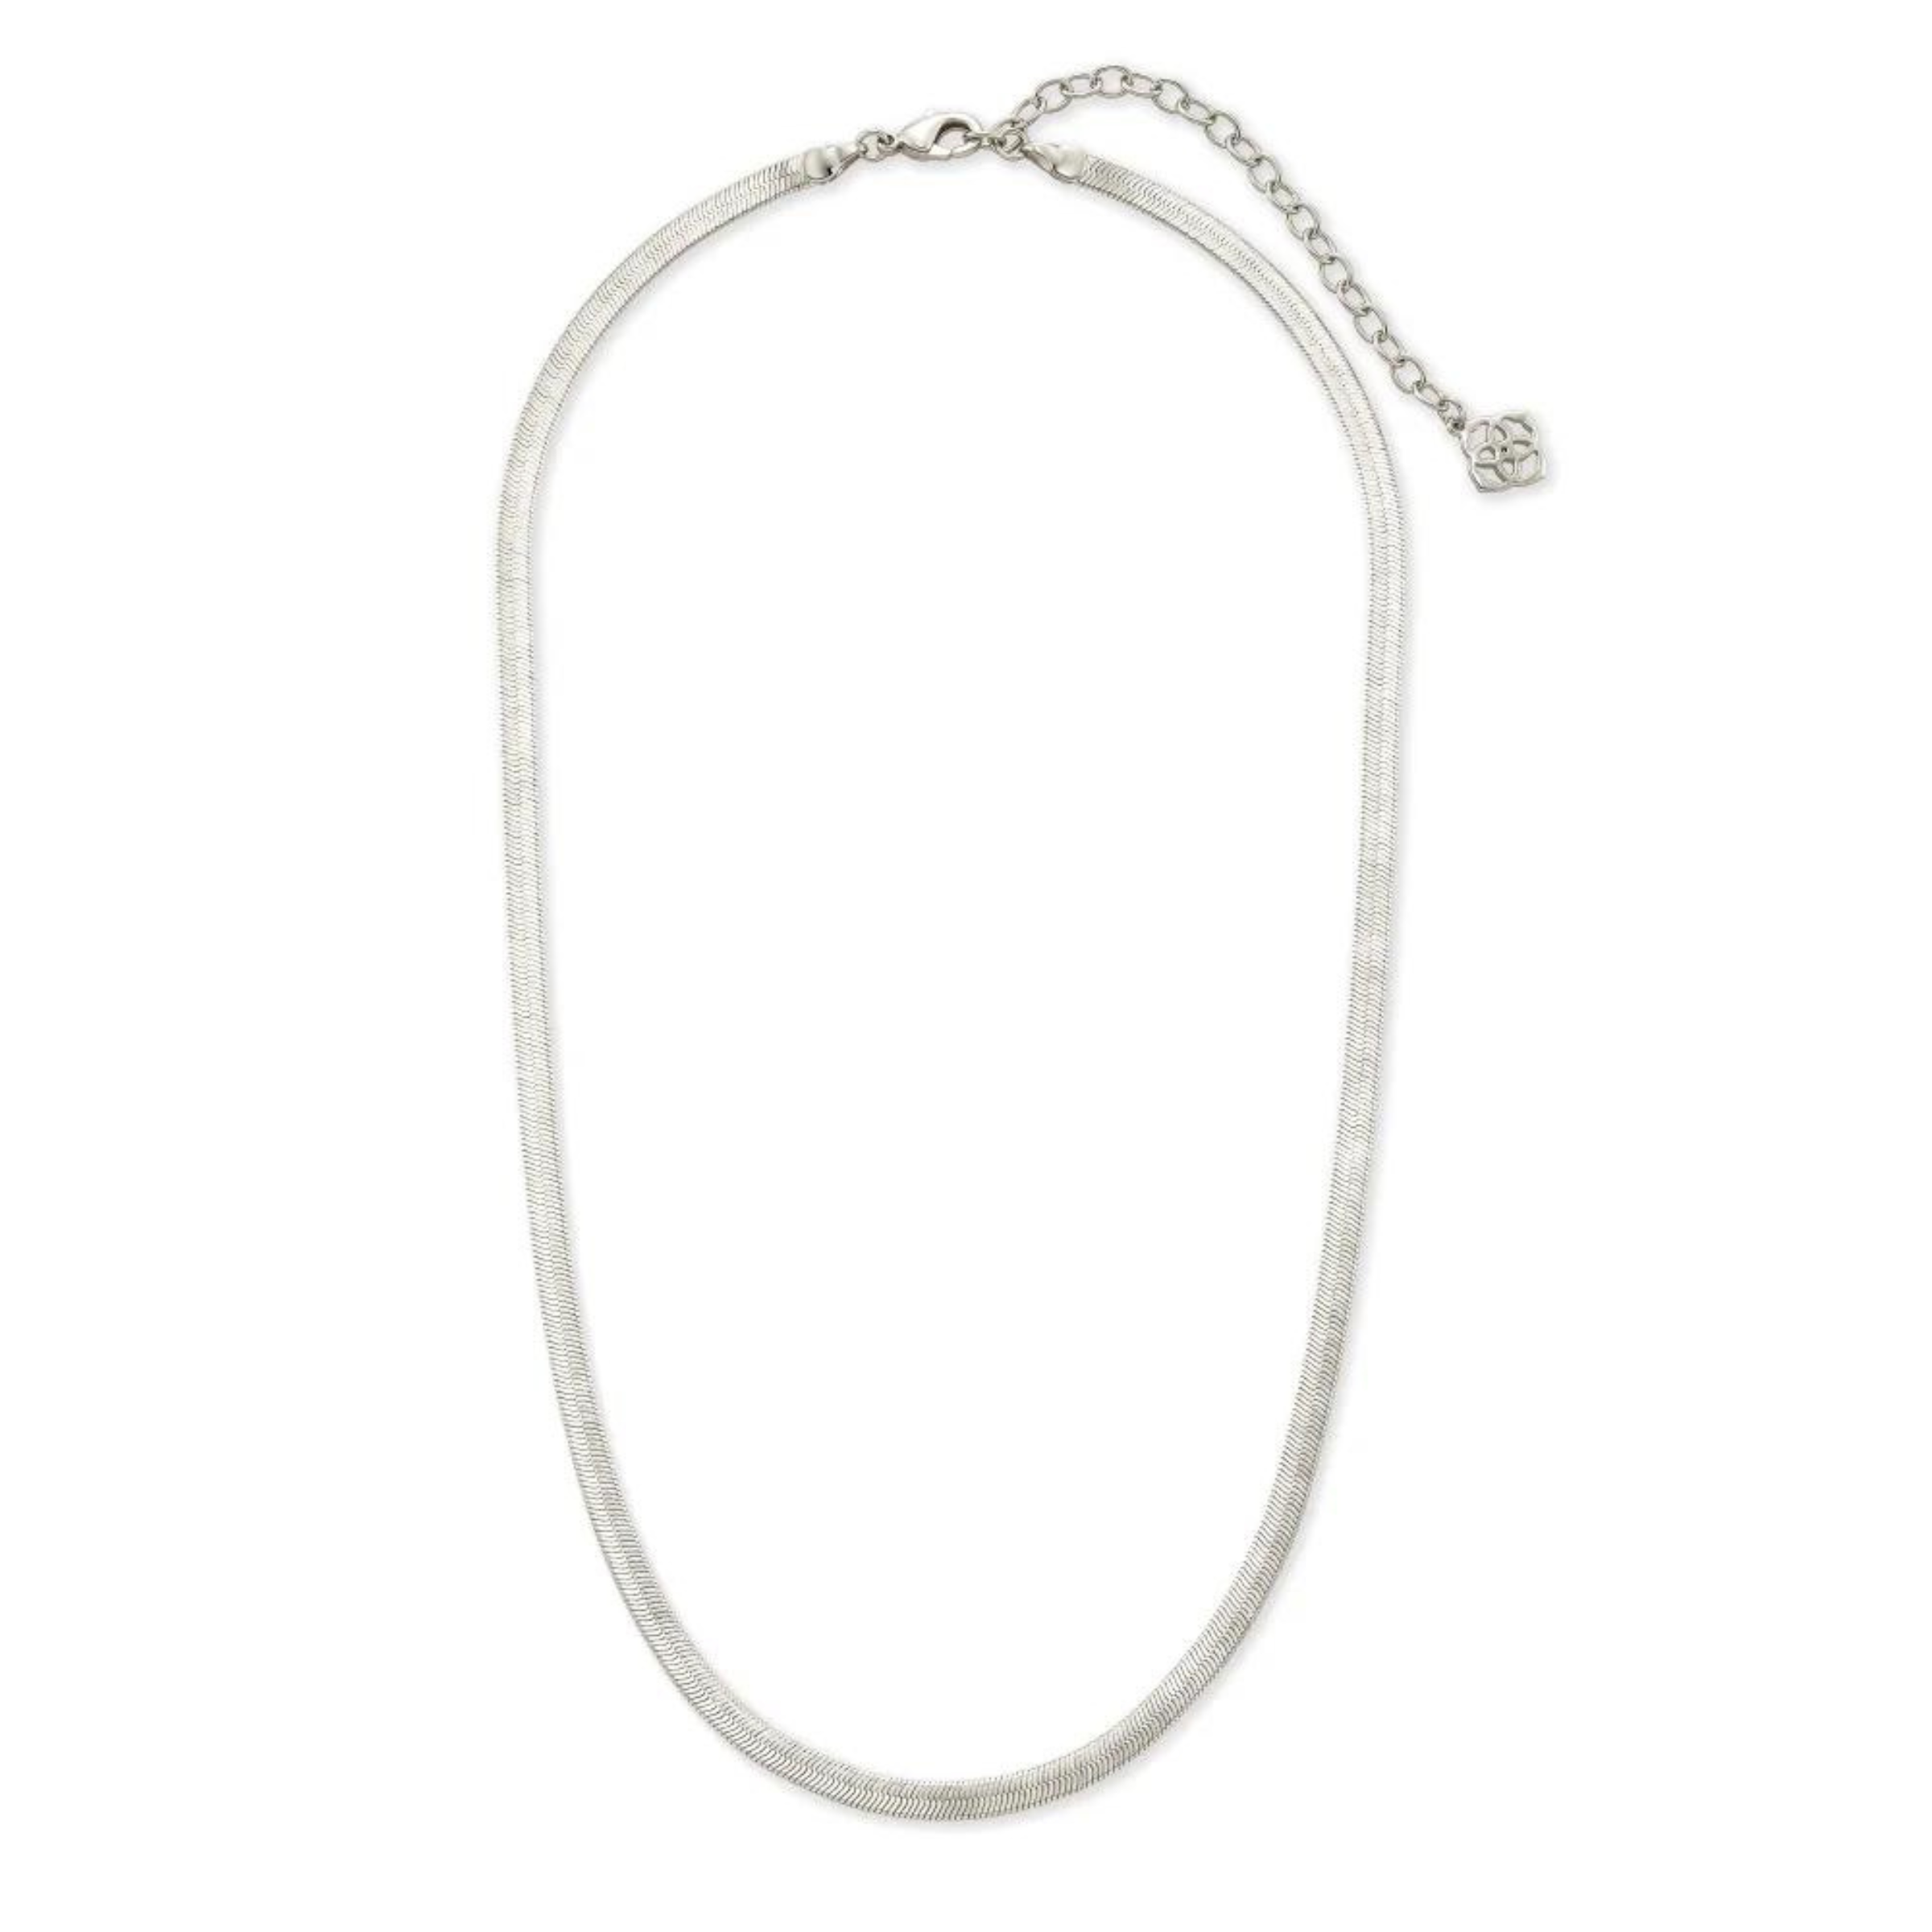 Kendra Scott | Kassie Chain Necklace in Silver - Giddy Up Glamour Boutique